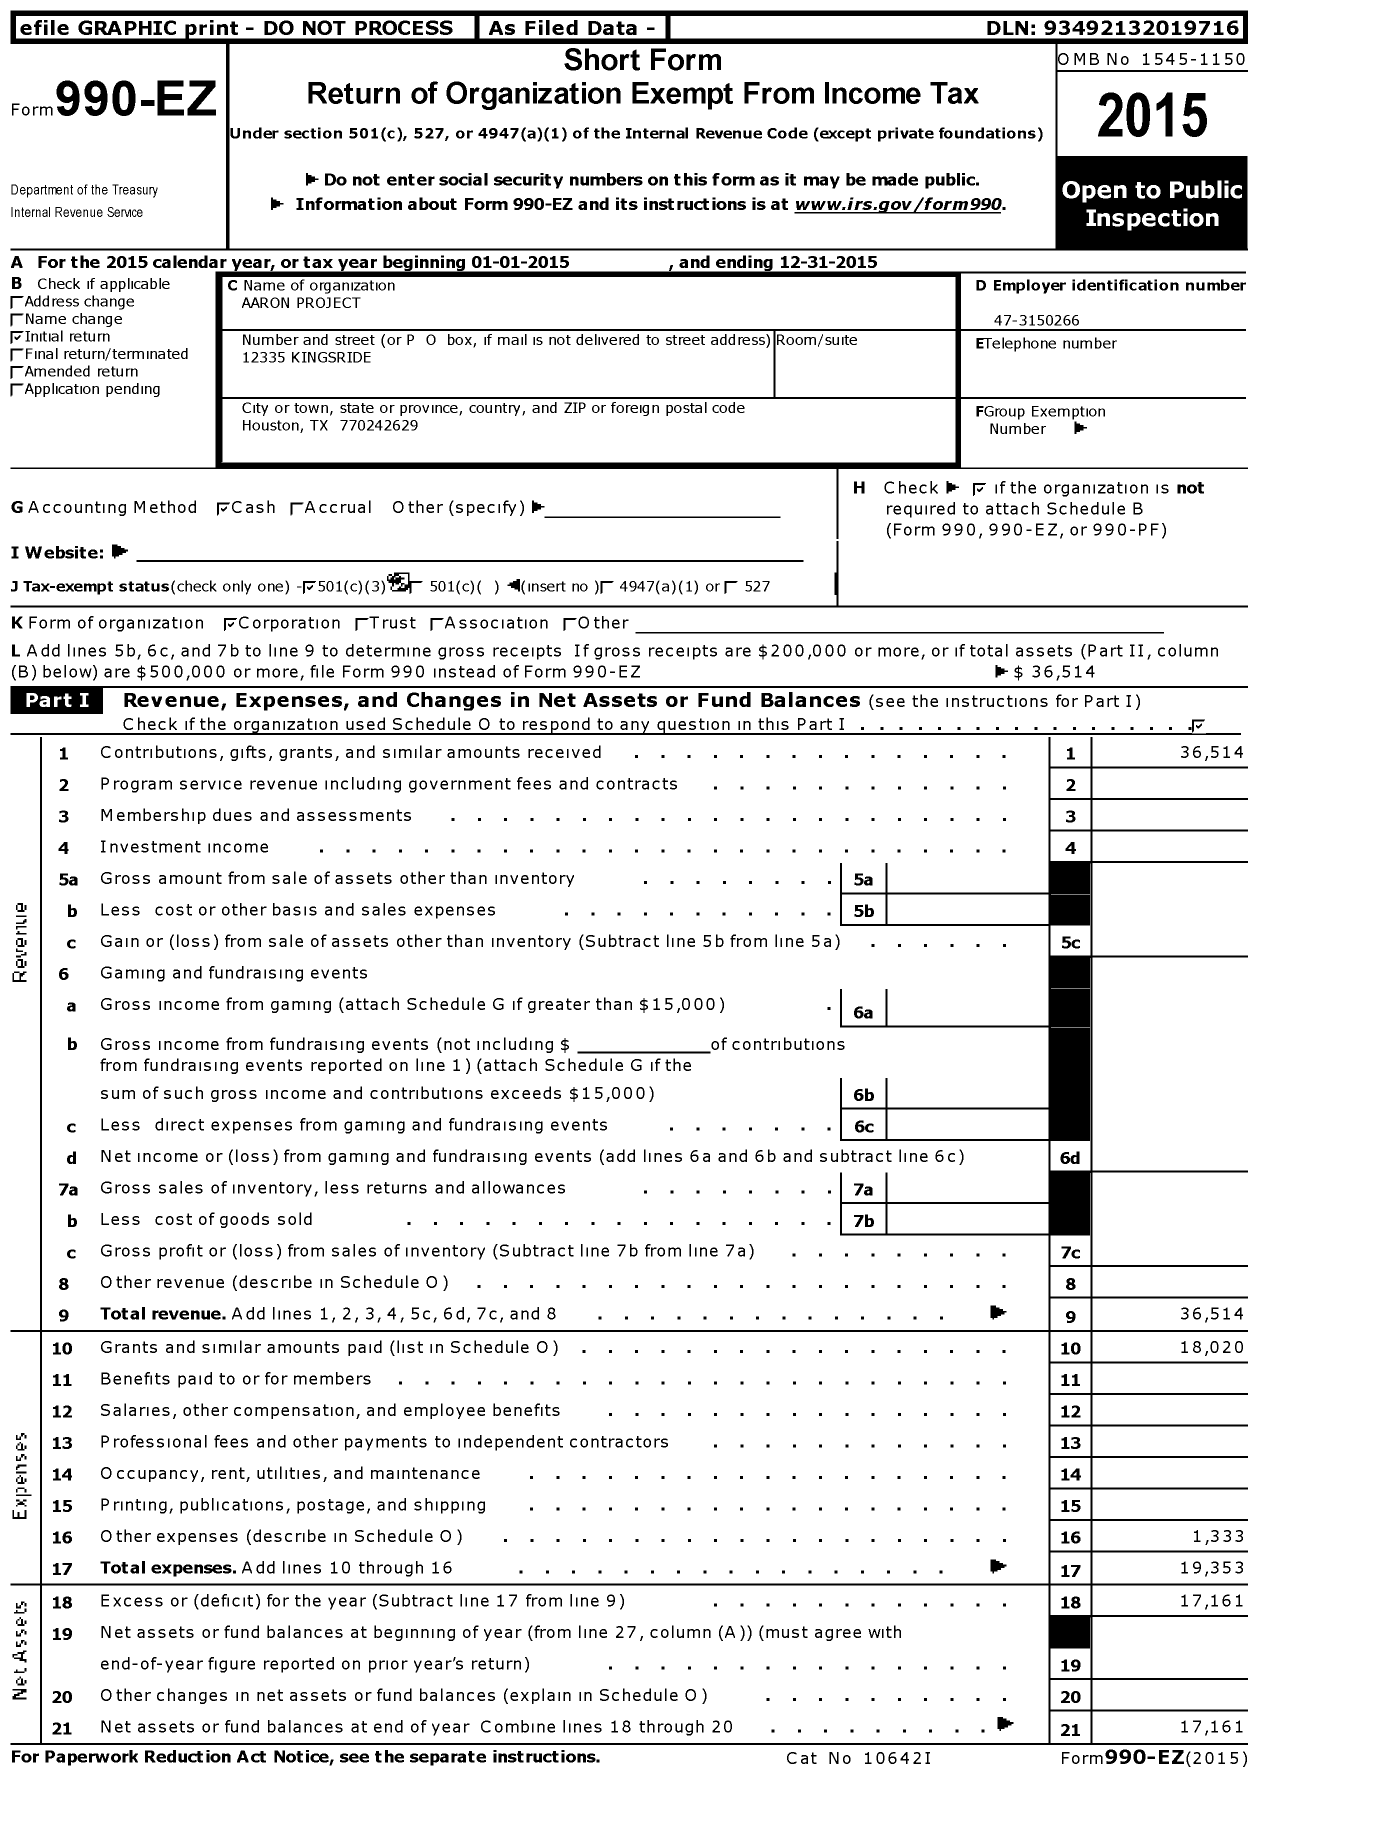 Image of first page of 2015 Form 990EZ for Aaron Project